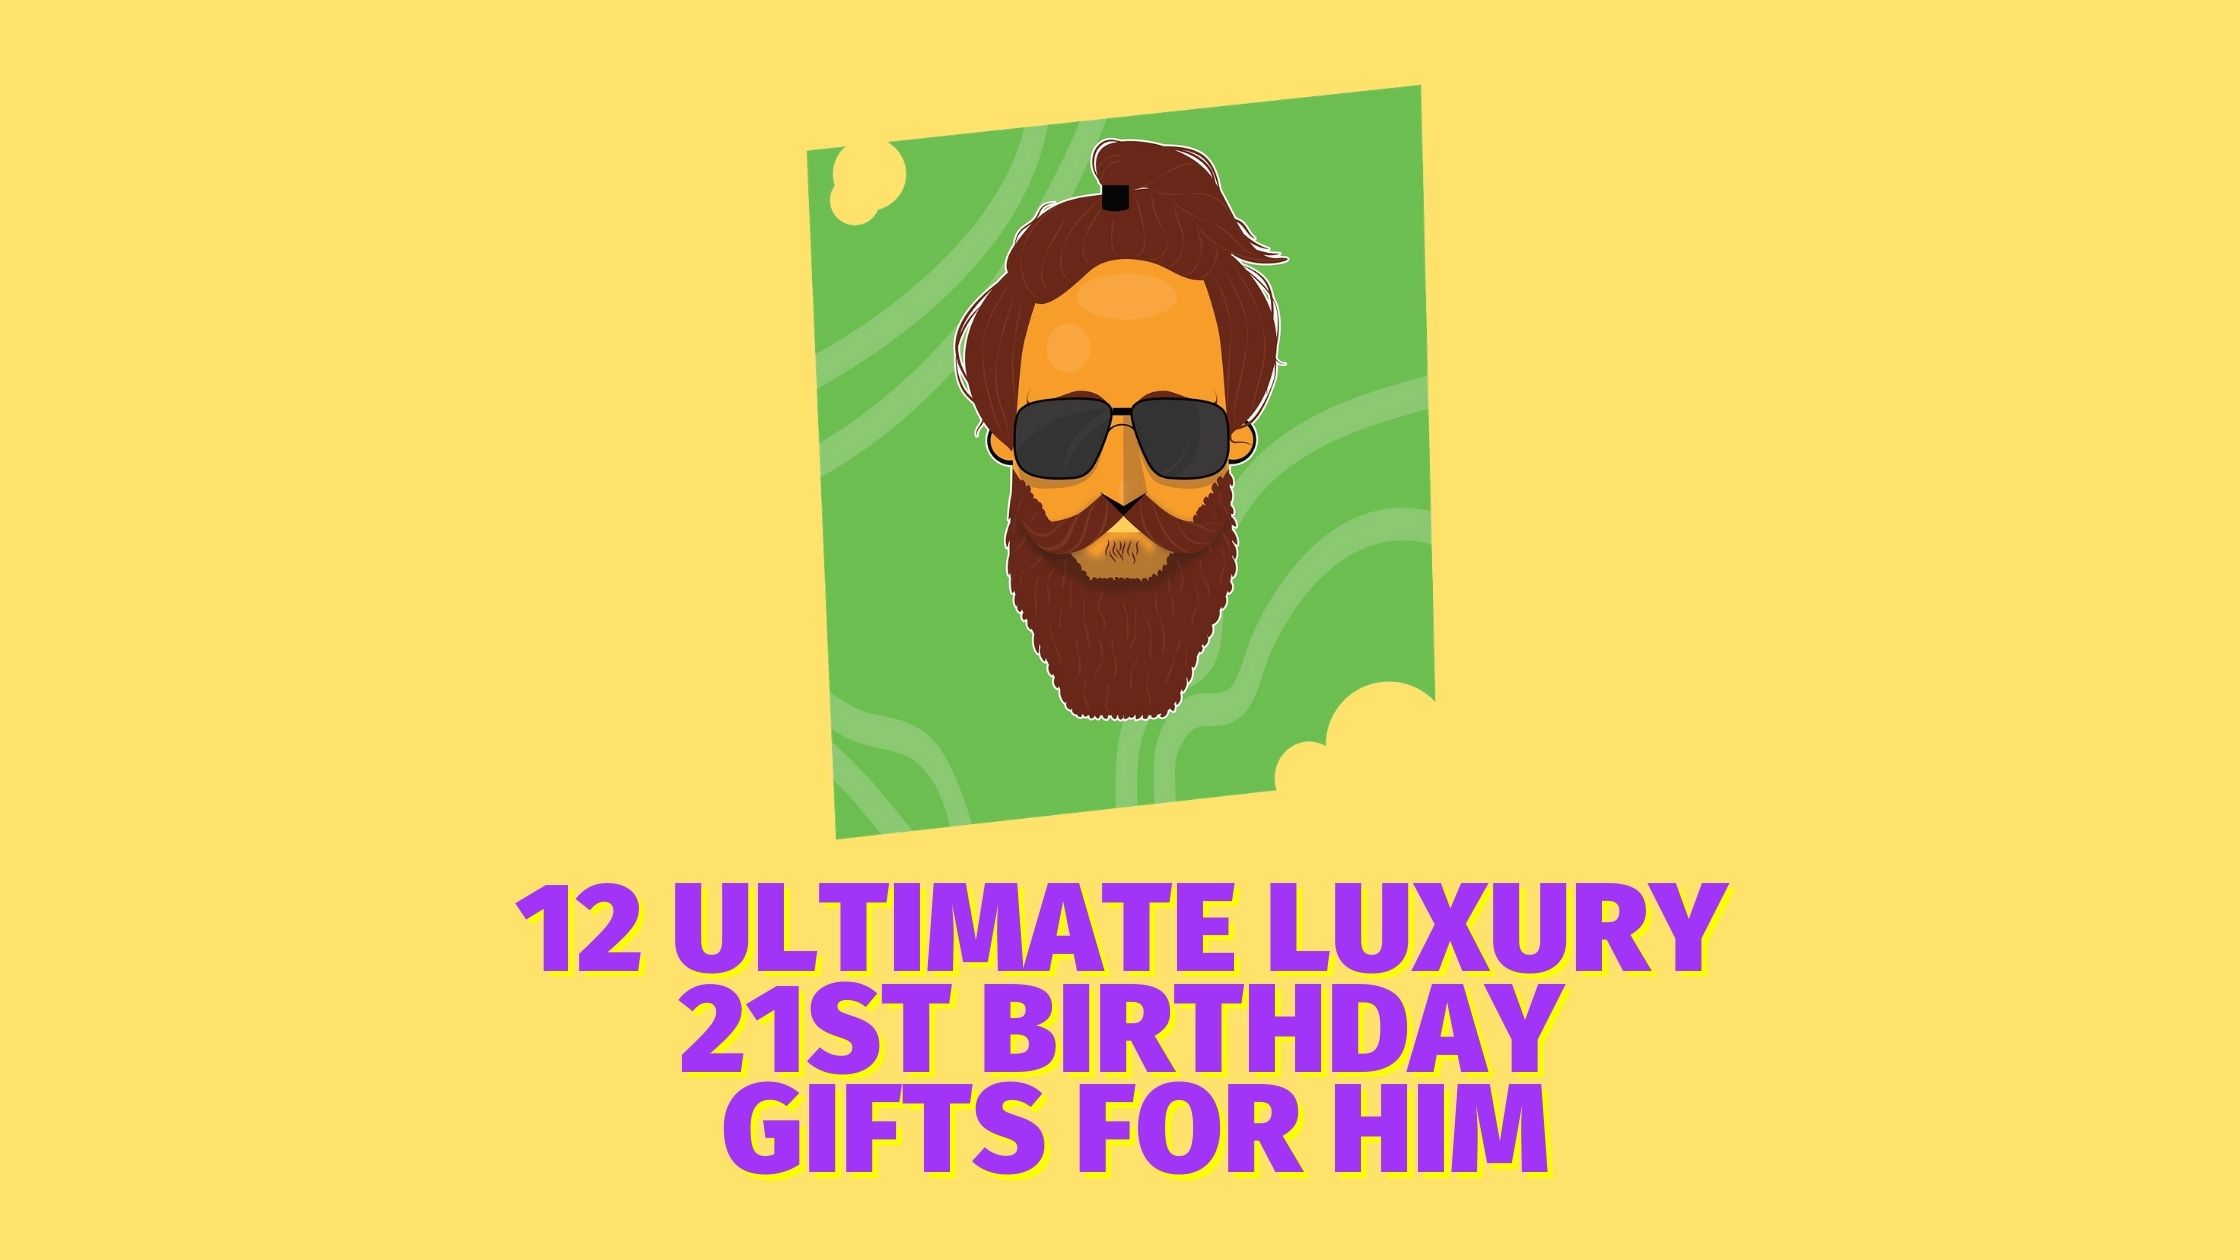 12 Ultimate Luxury 21st Birthday Gifts for Him